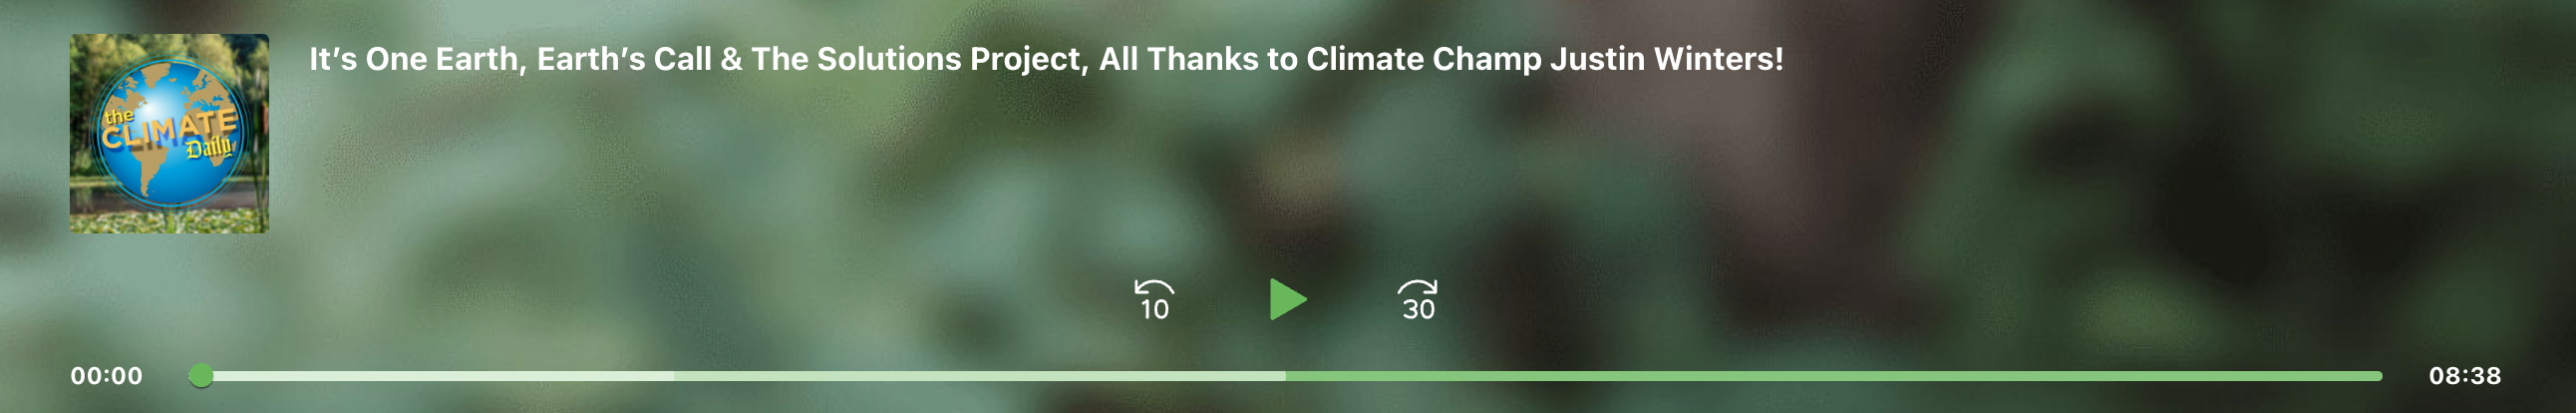 It’s One Earth, Earth’s Call & The Solutions Project, All Thanks to Climate Champ Justin Winters! by The Climate | Sep 9, 2021 | Podcasts, The Climate Daily